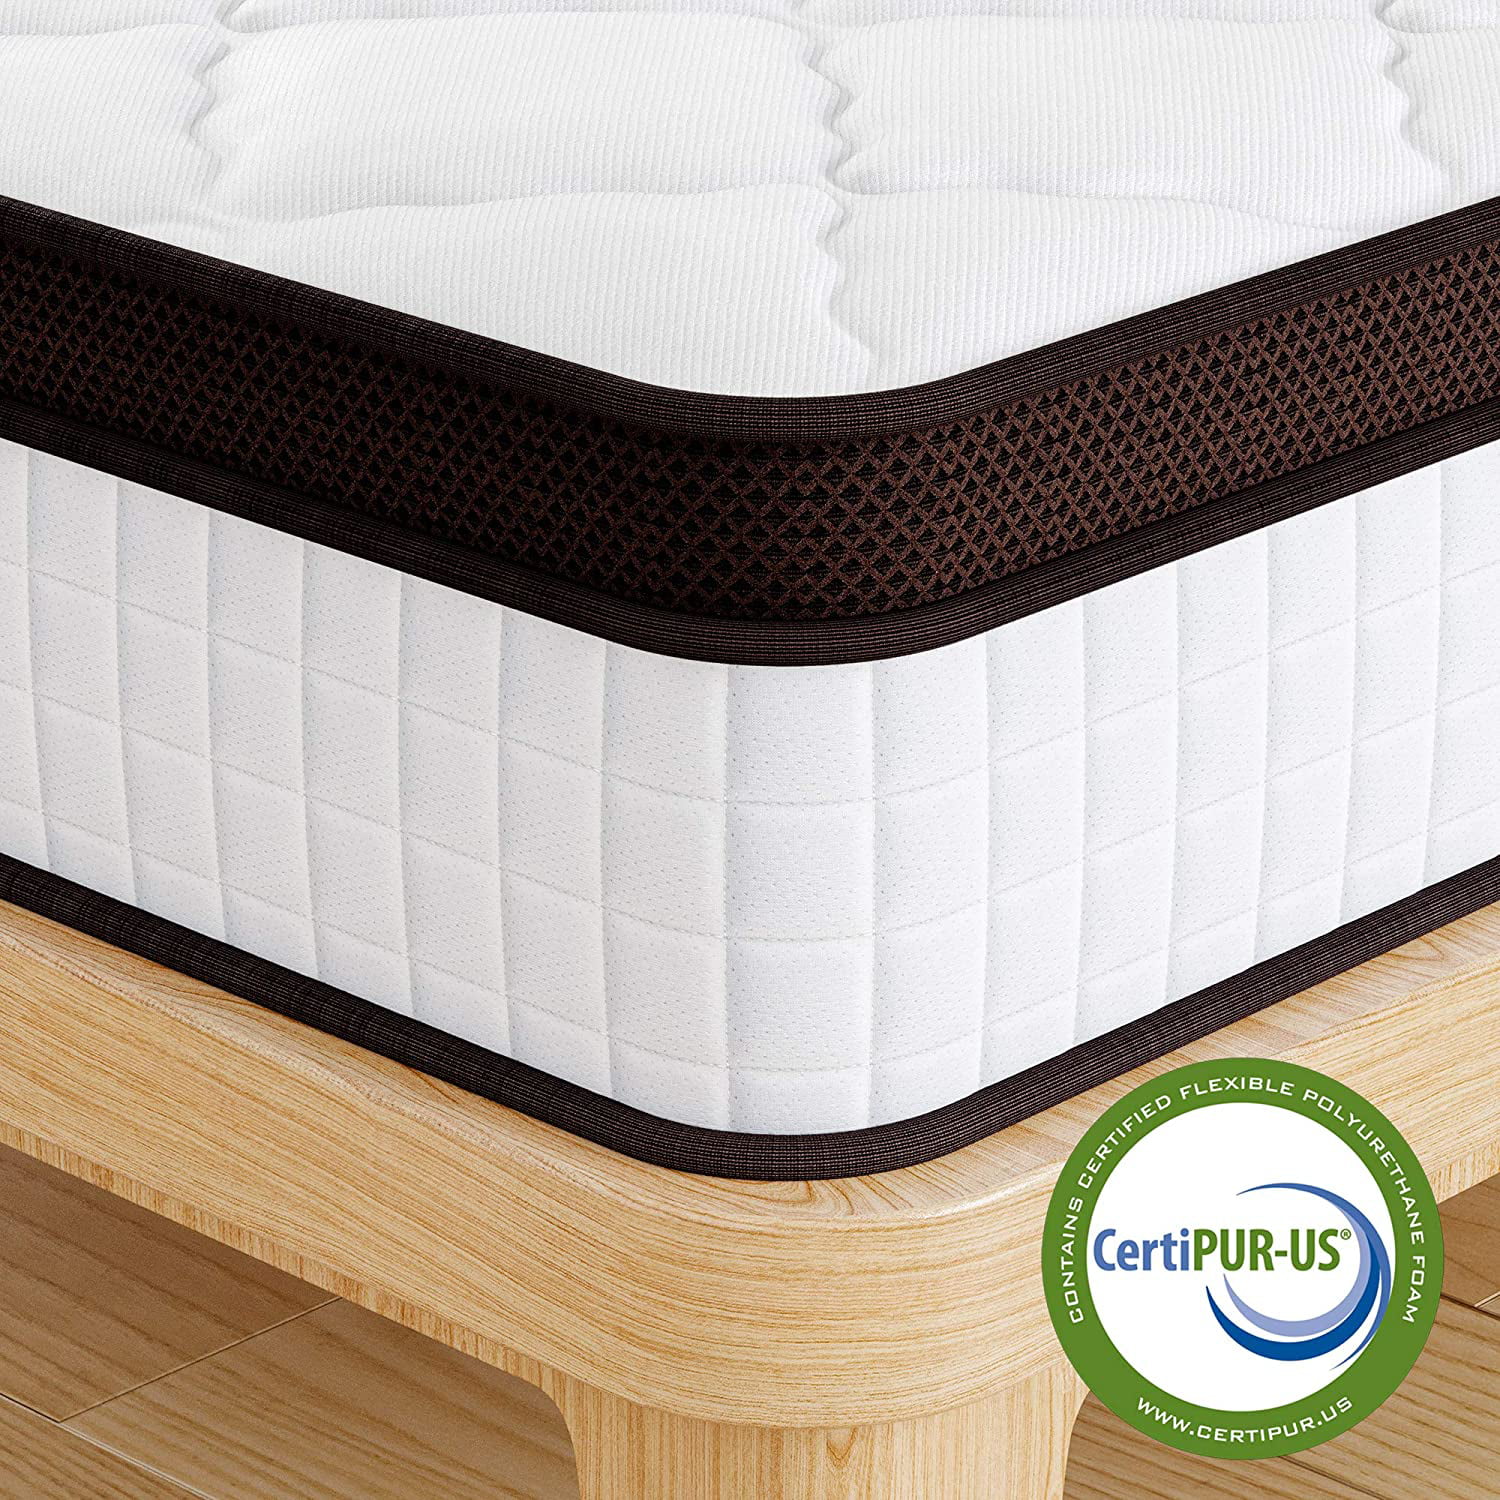 Details about   Kescas Memory Foam Hybrid Spring Mattress 10Inch FULL Size Bed In A Box 